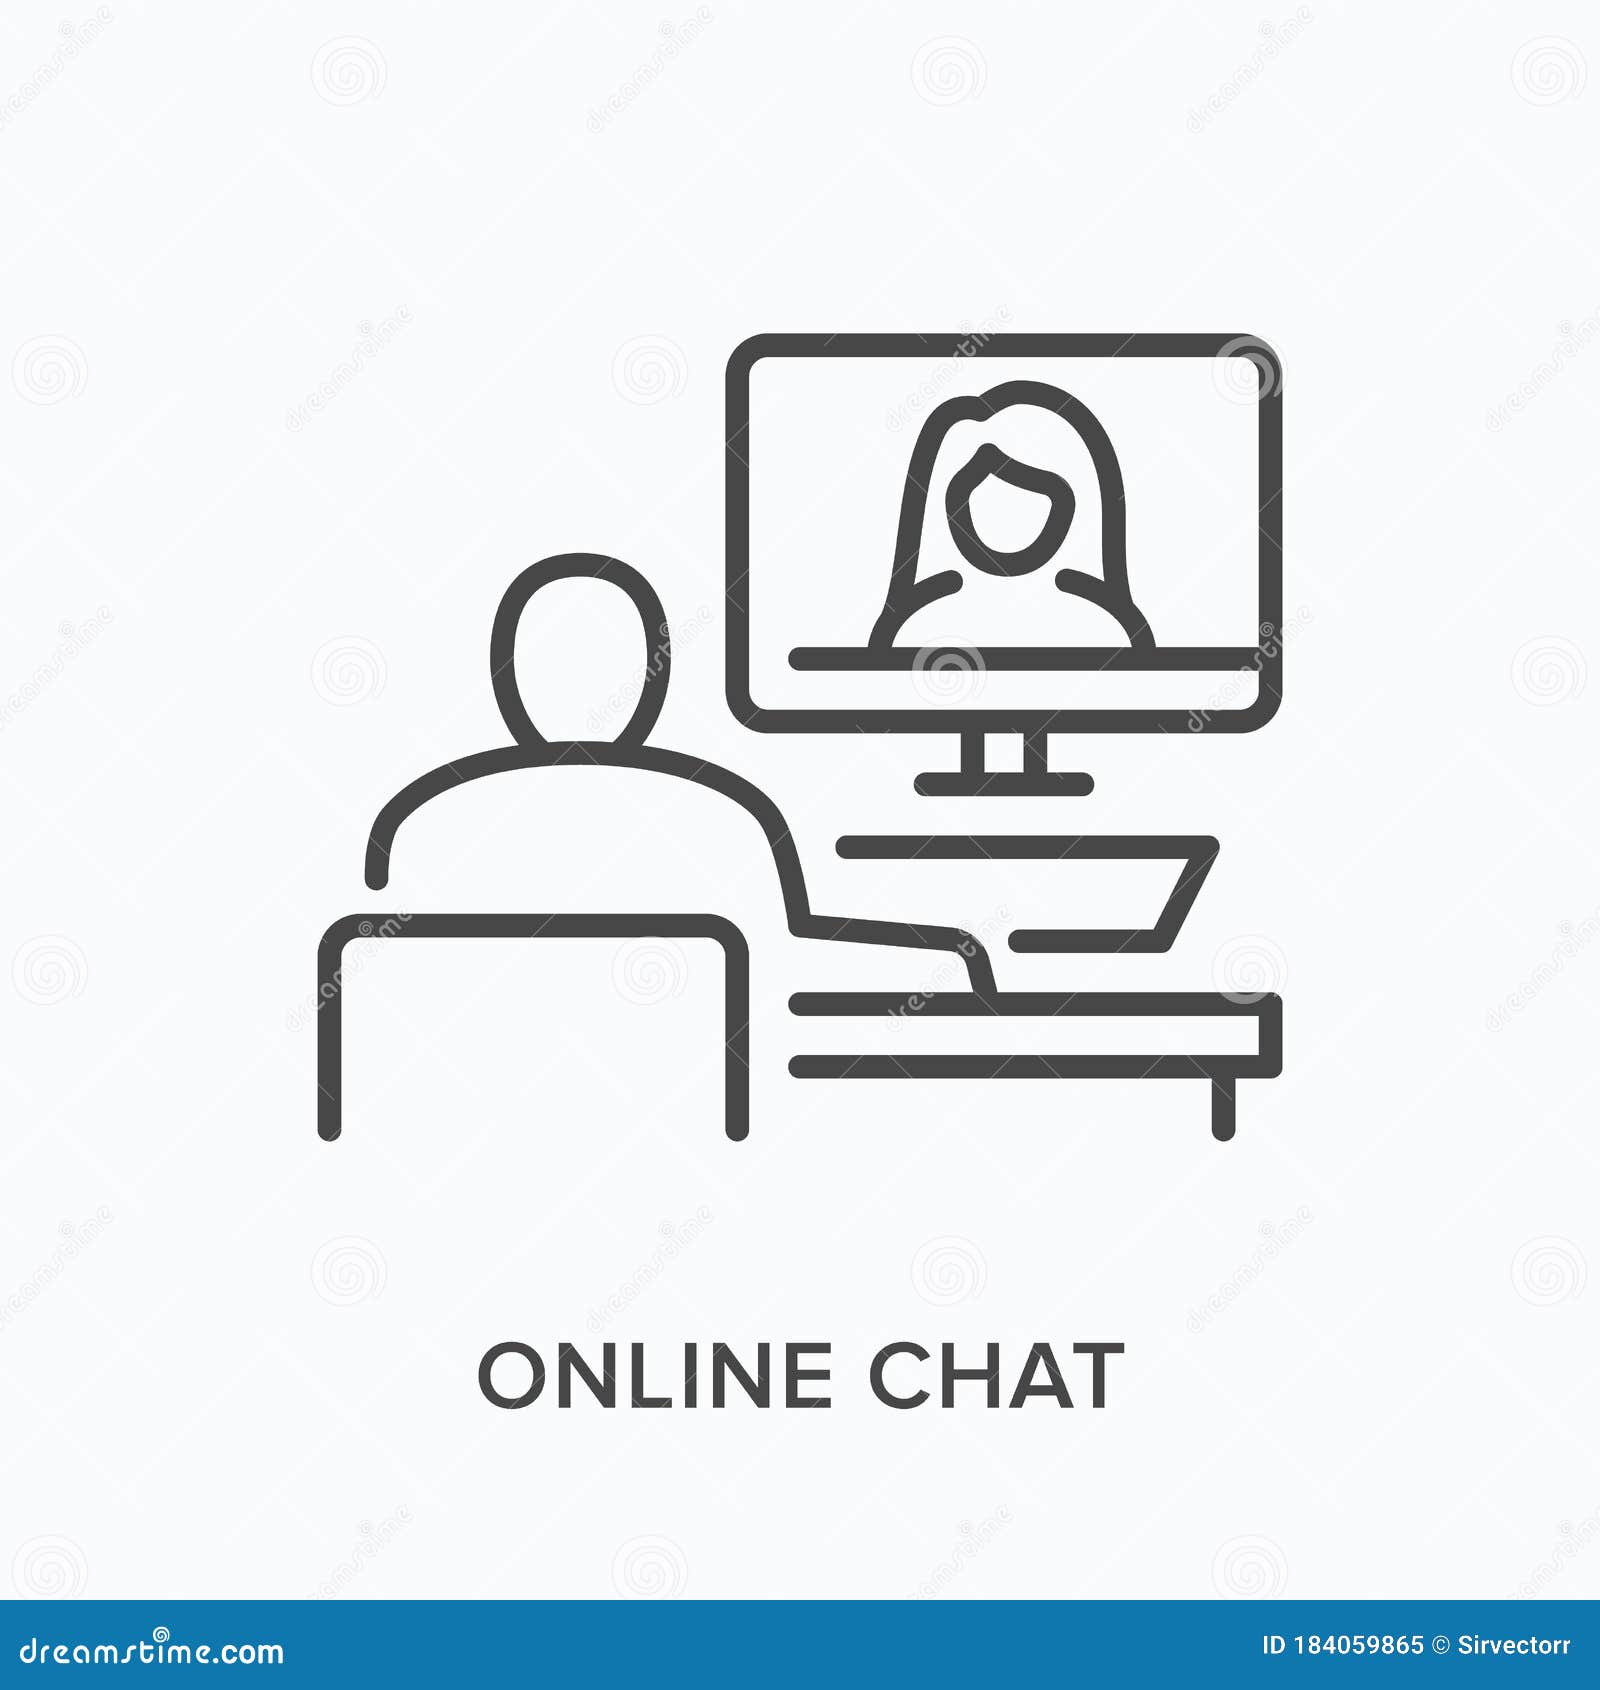 online chat flat line icon.  outline  of man and woman using computer for videoconference. remote